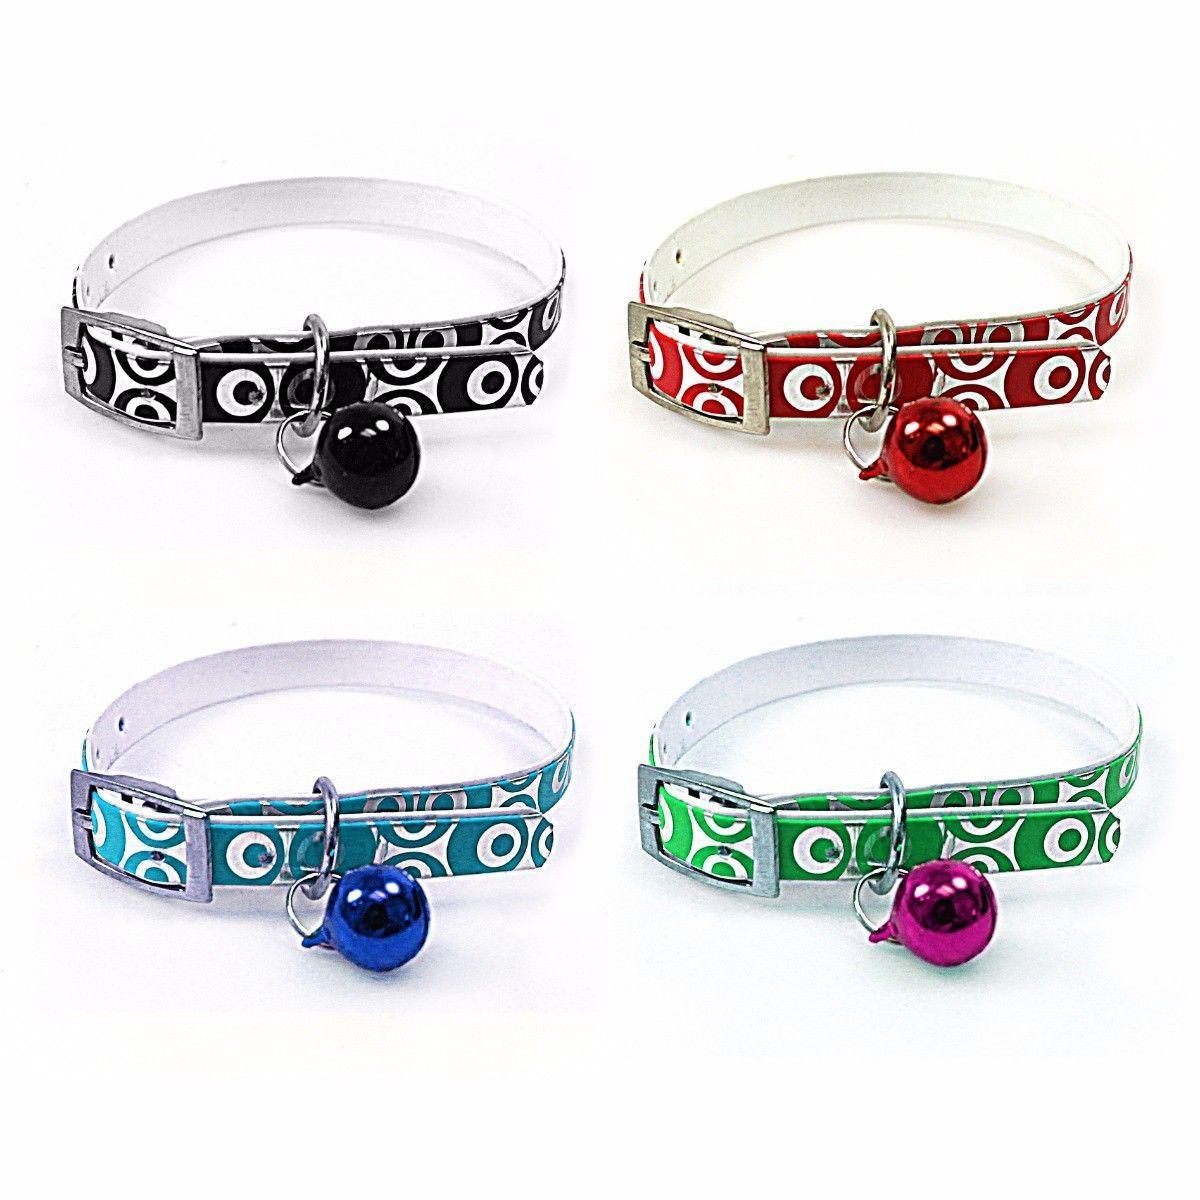 Pet Dog Cat Collar Metallic Print with Bell Assorted Colours 3200 (Large Letter Rate)